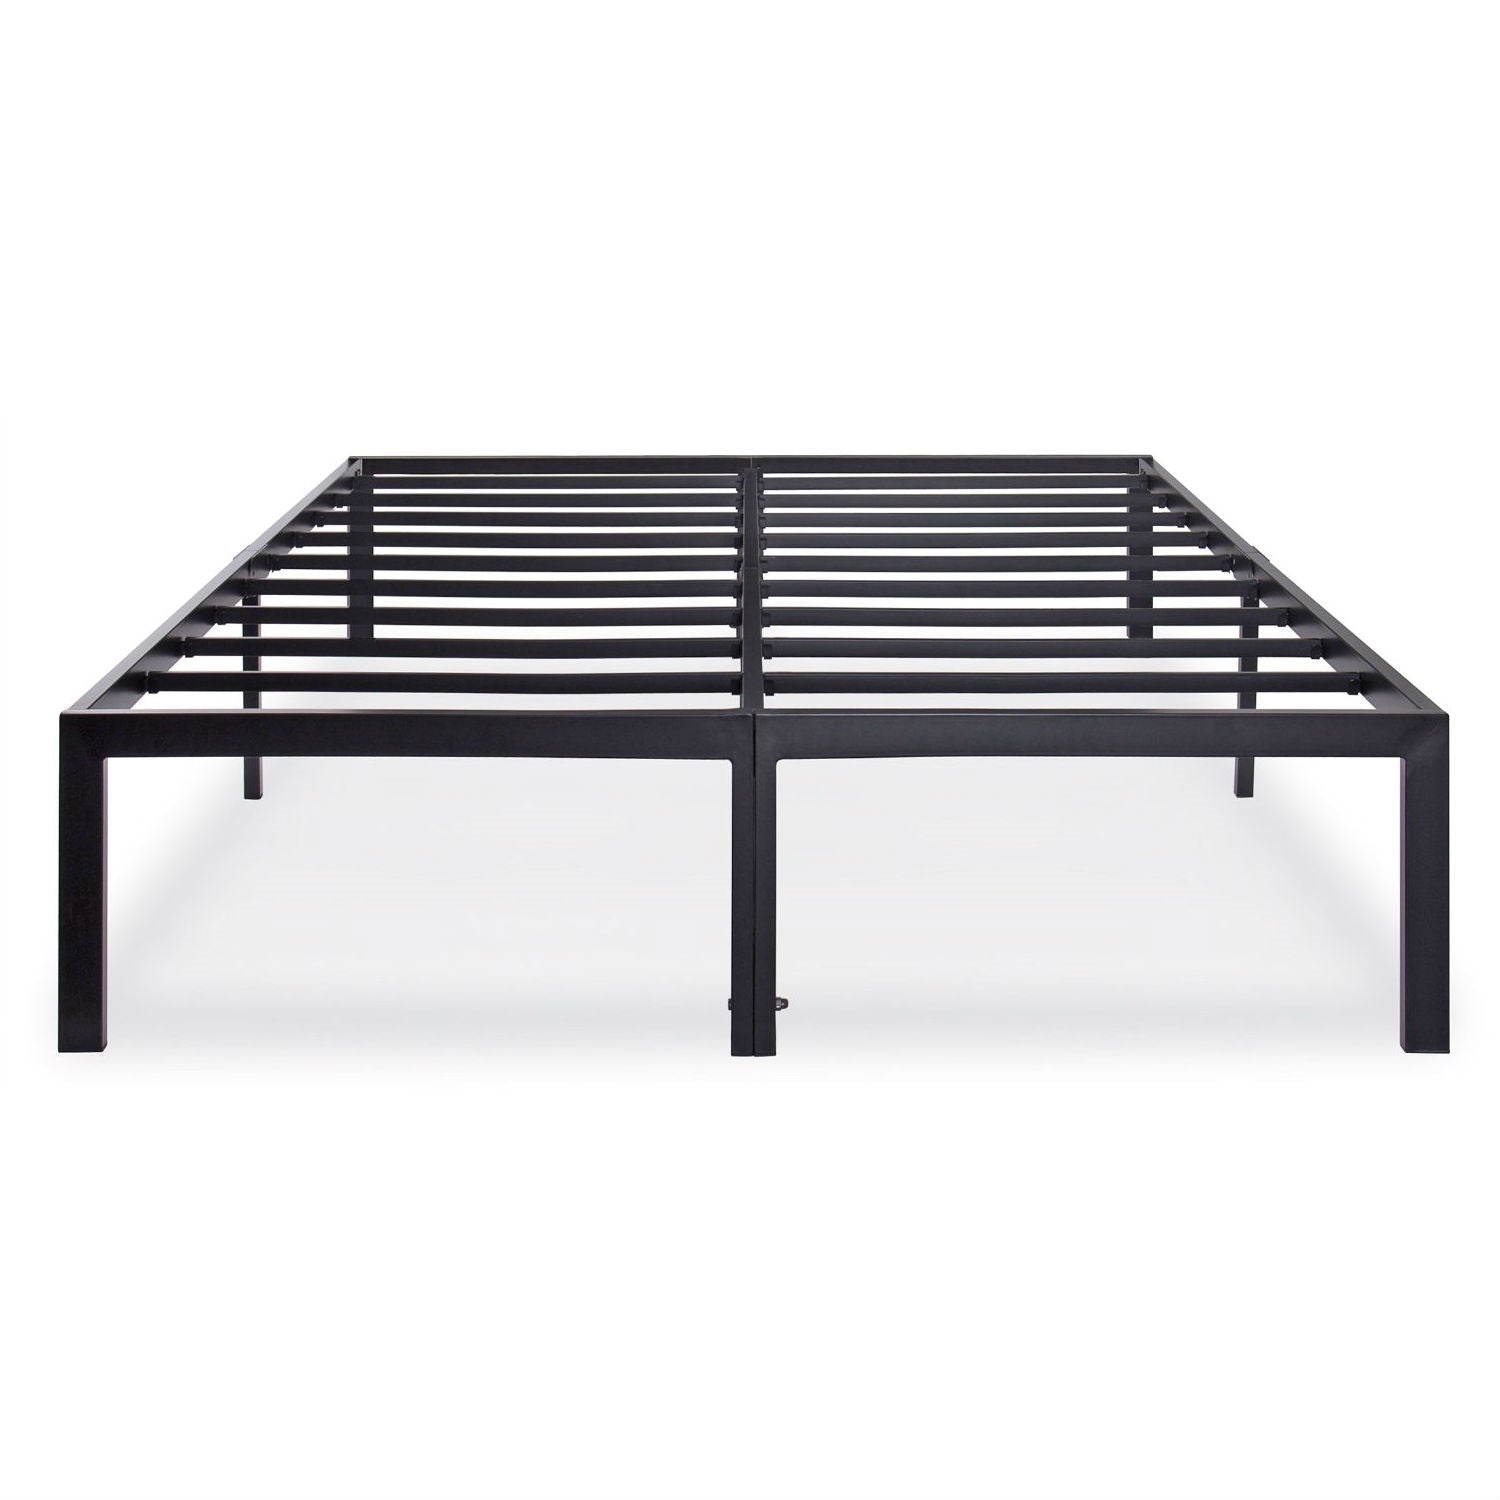 Bedroom > Bed Frames > Metal Beds - Queen Size Heavy Duty Metal Platform Bed Frame - Holds Up To 2,200 Lbs